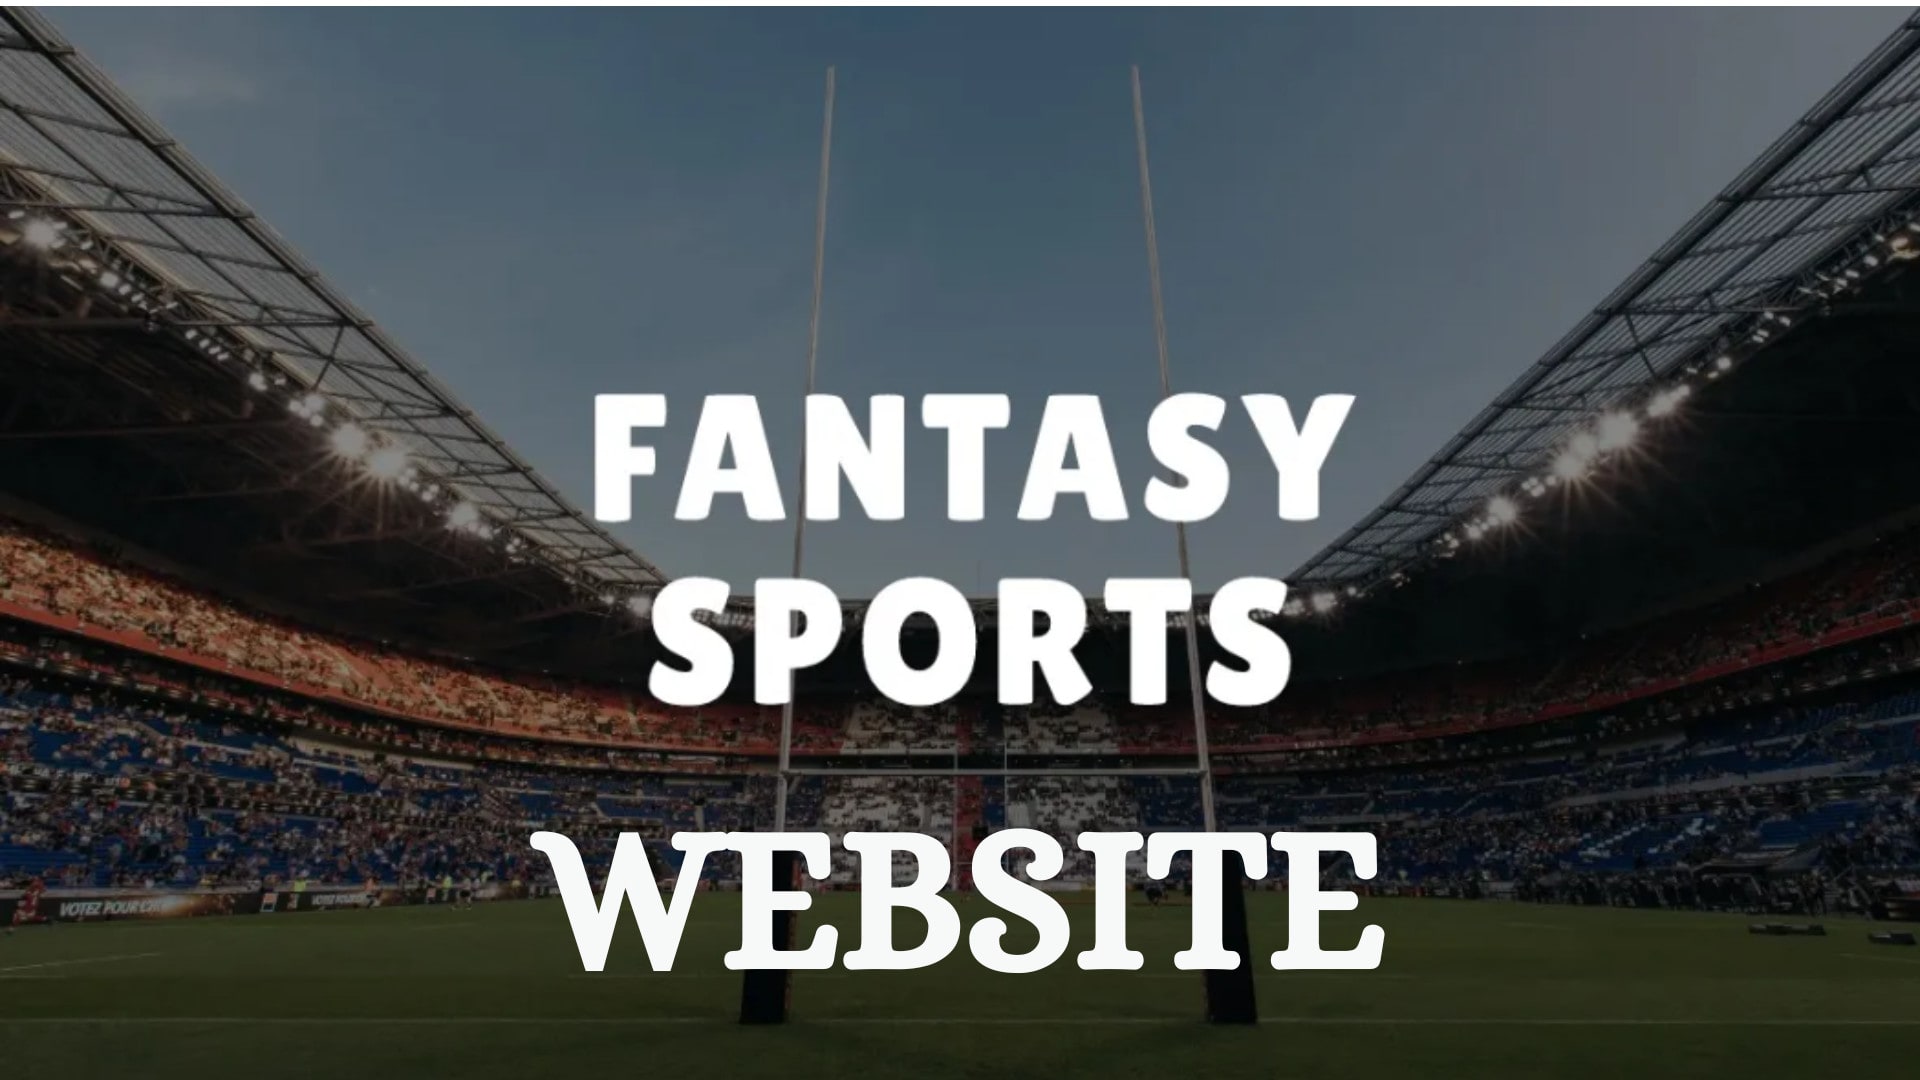 5 Actionable Tips on fantasy sports And Twitter.